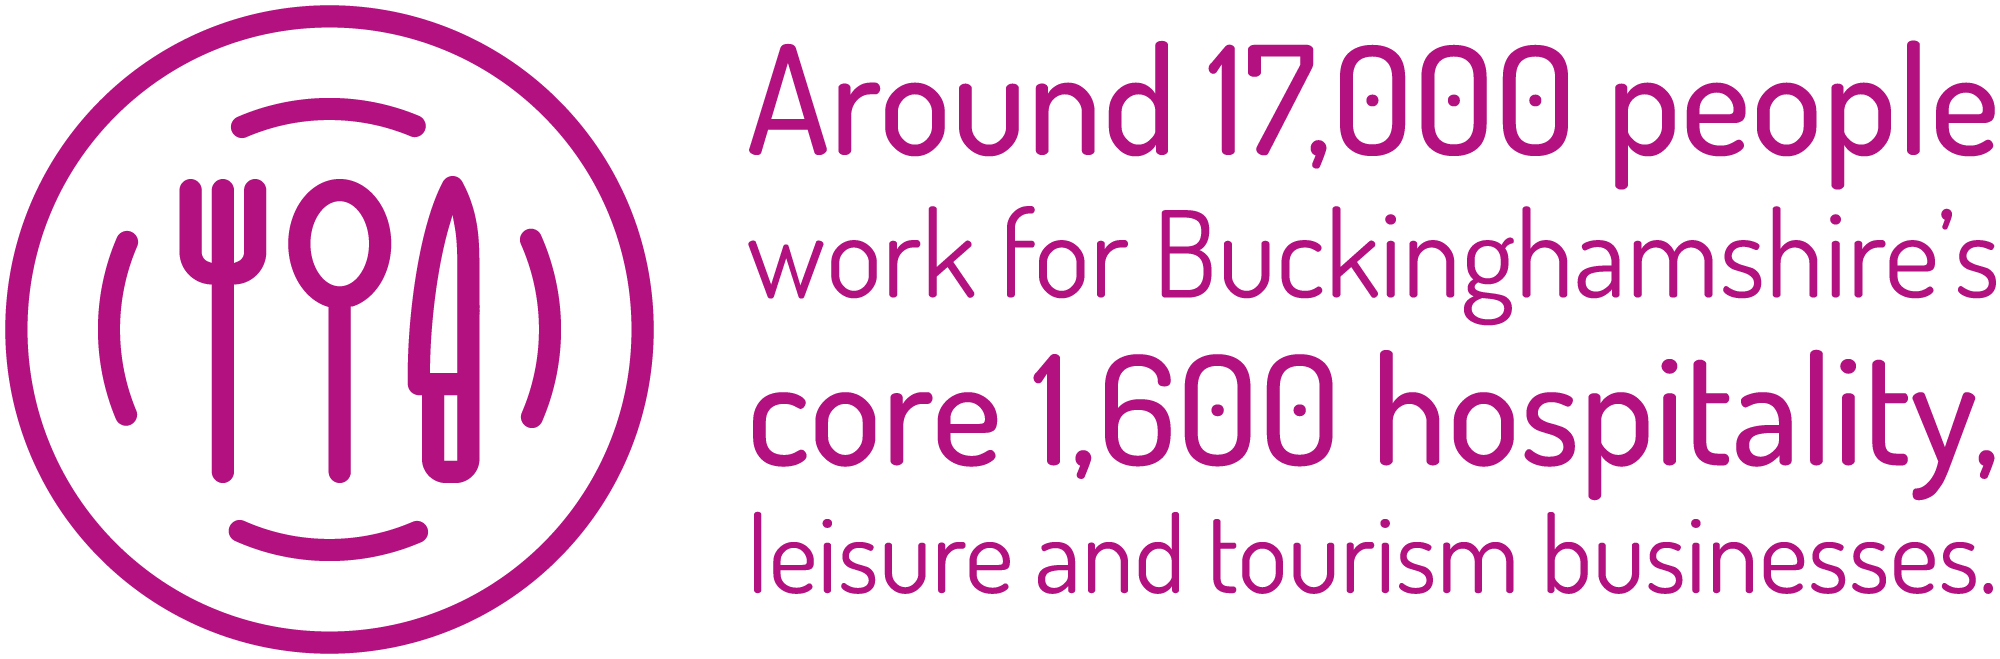 Around 17,000 people work for Buckinghamshire's core 1,600 hospitality, leisure and tourism businesses